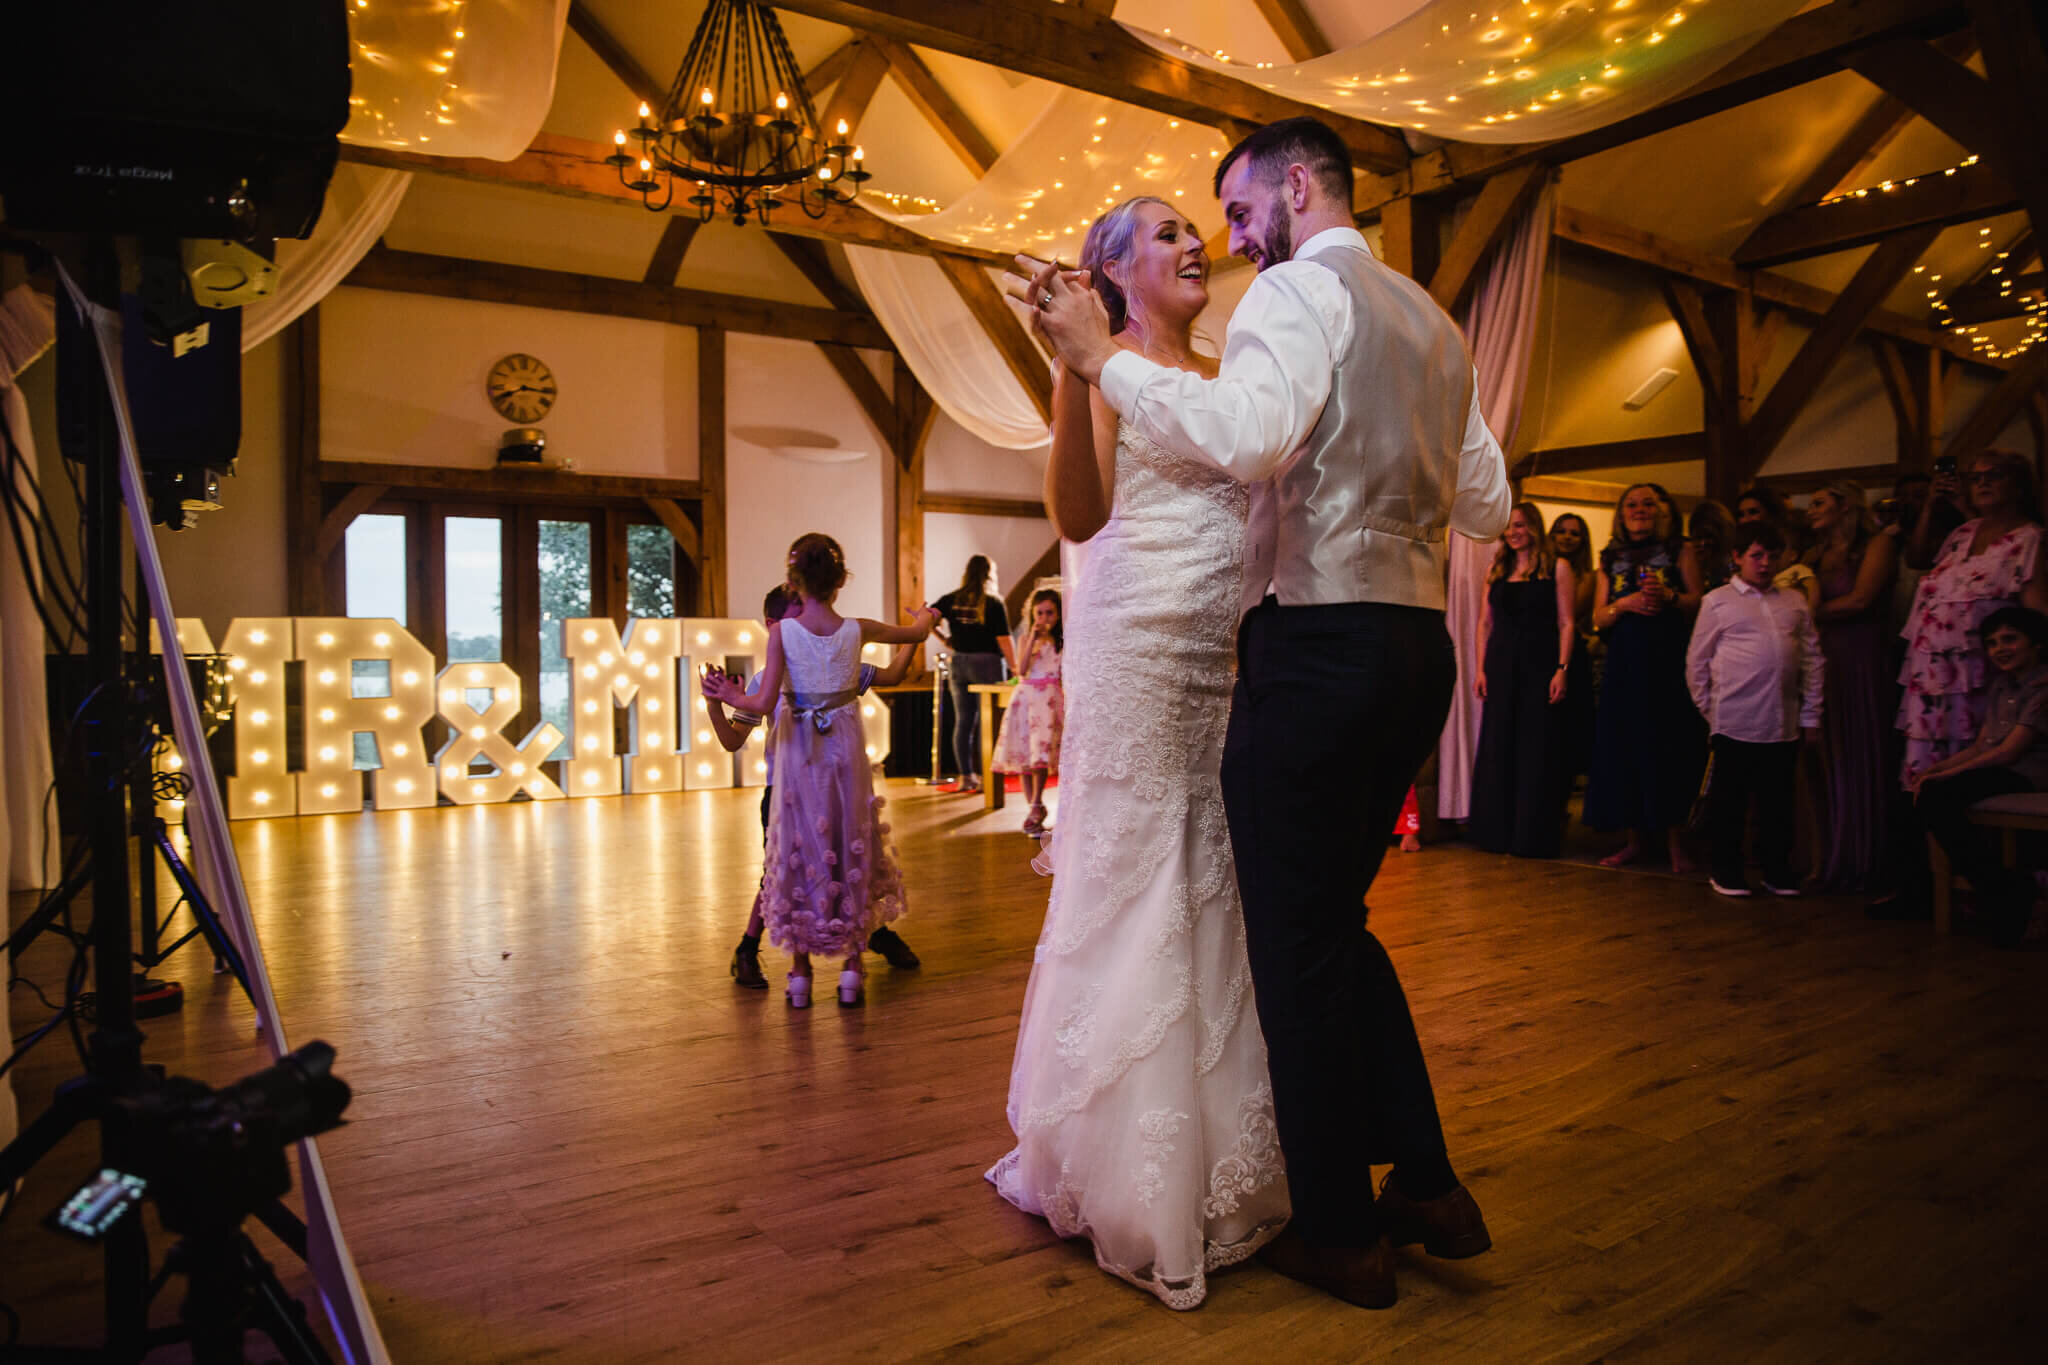 first dance performed in front of set of MR &amp; MRS light up letters